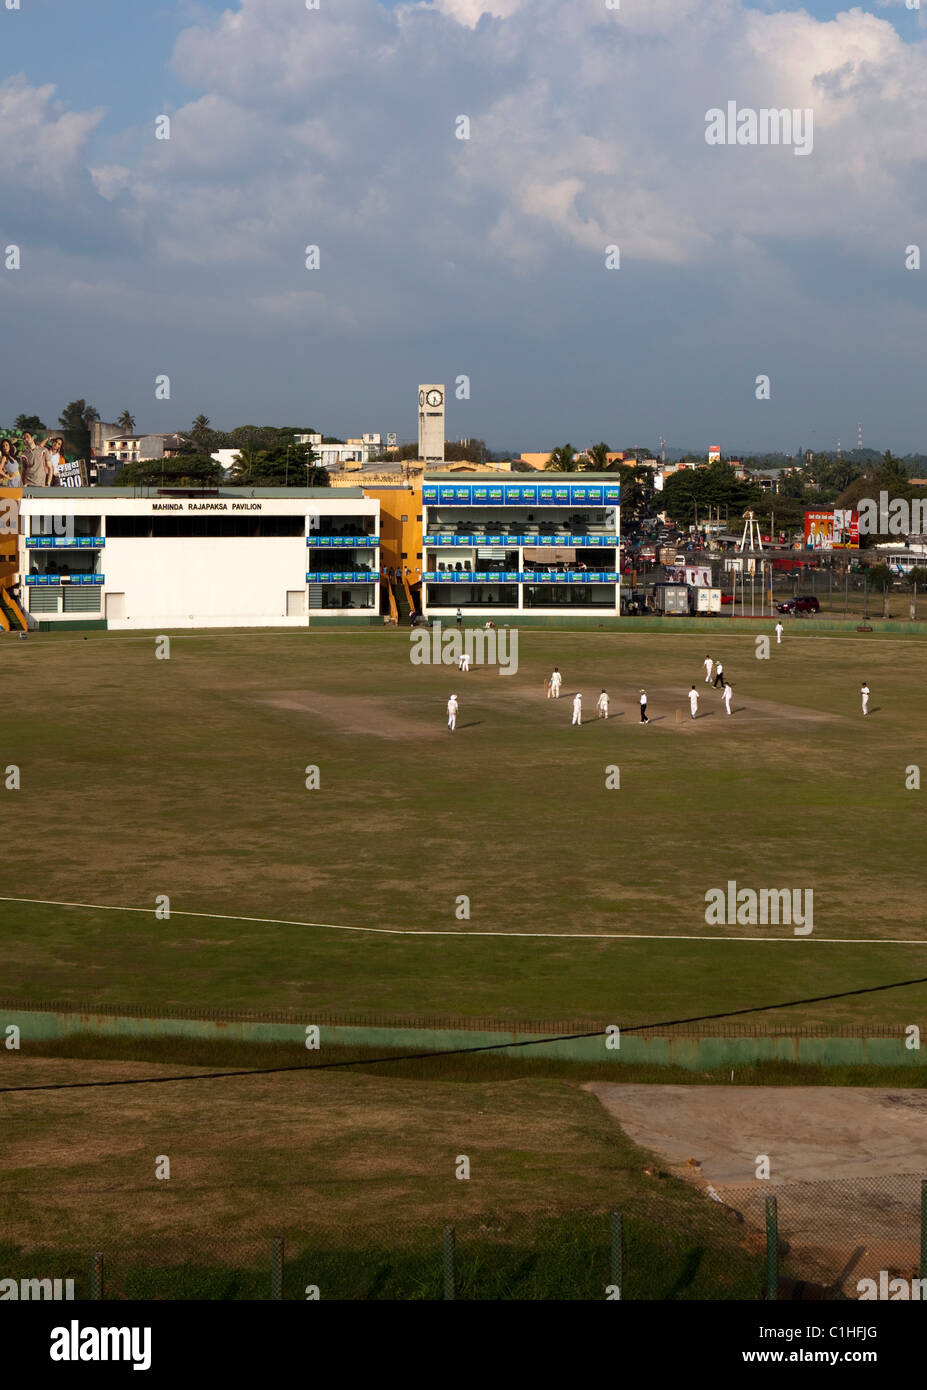 A view of the cricket ground in Galle, Sri Lanka Stock Photo